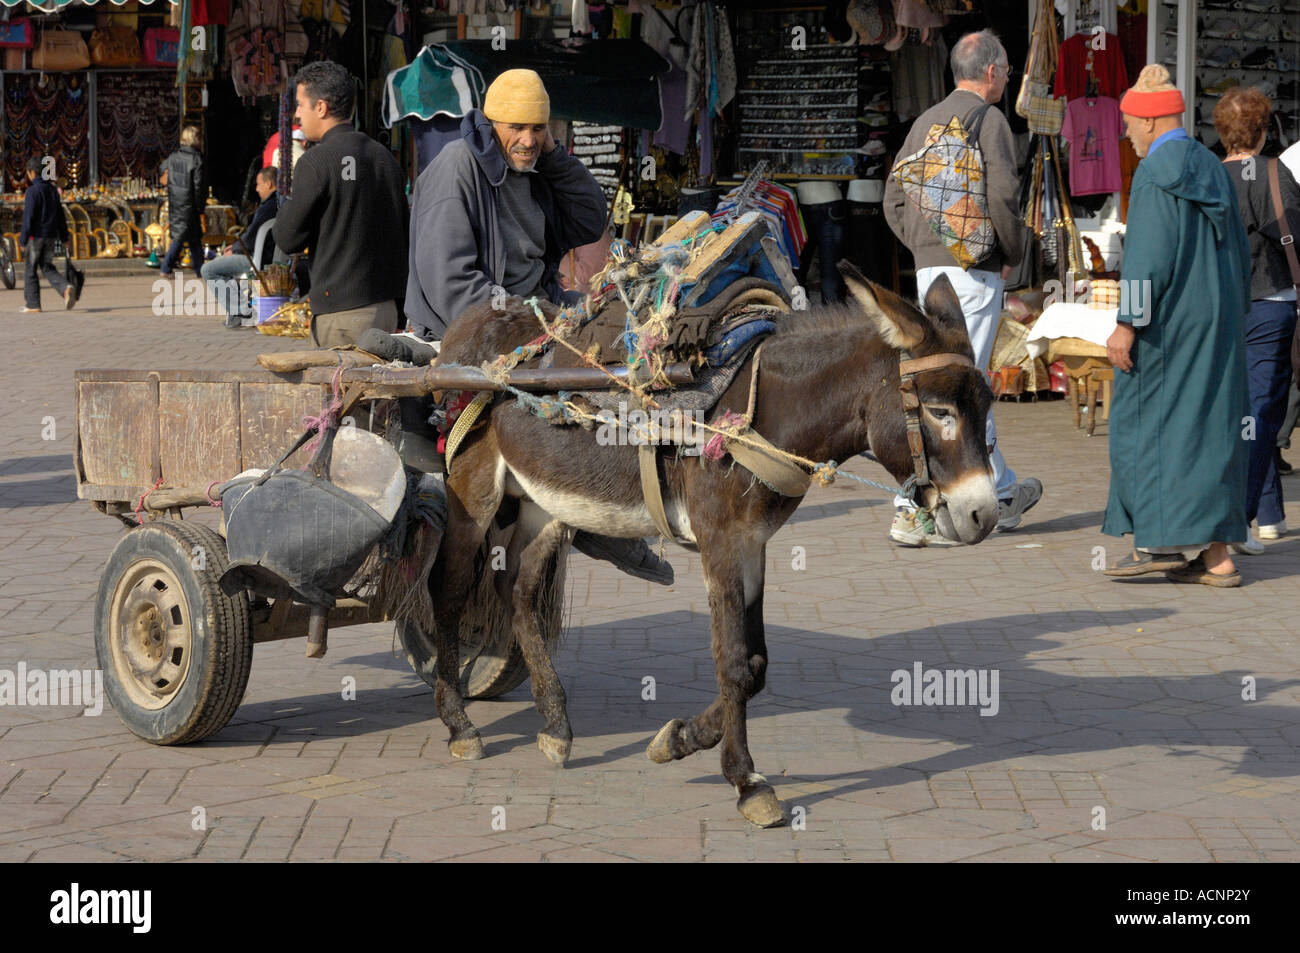 Donkey cart Marrakech Morocco North Africa Stock Photo